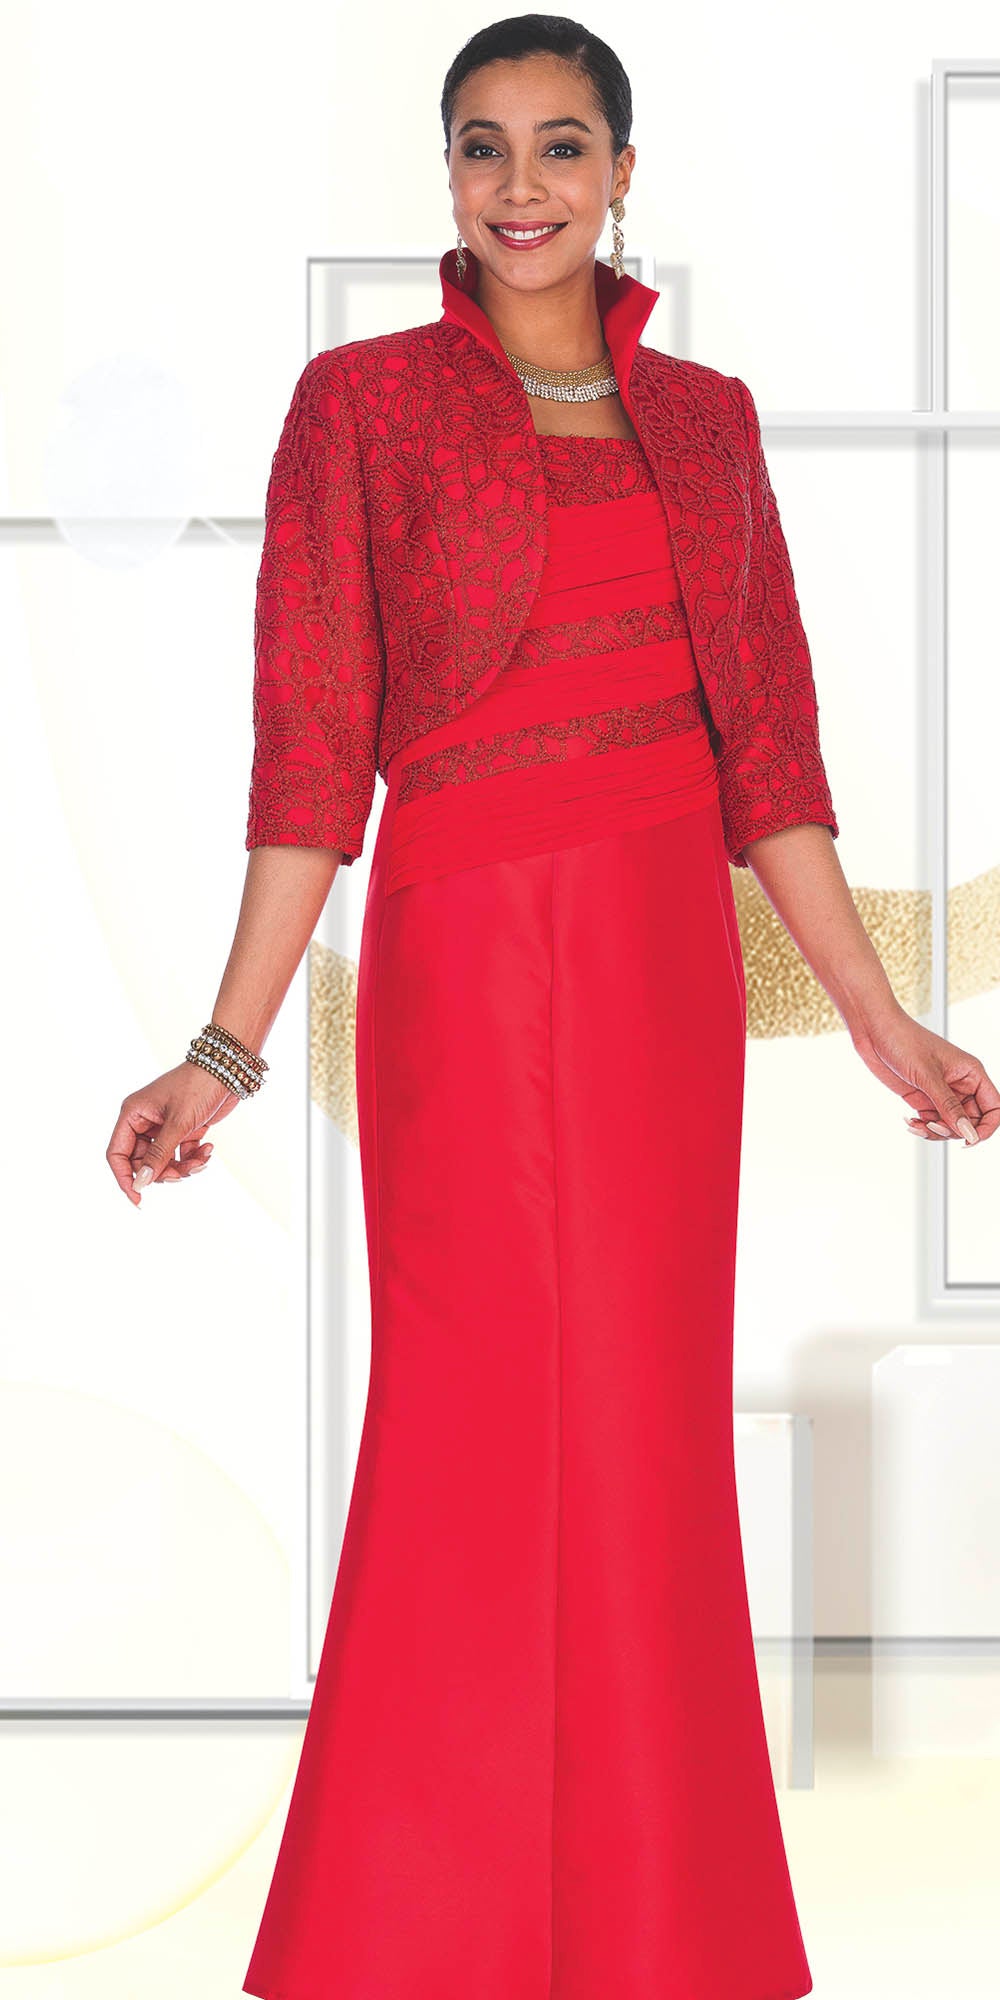 Champagne - 5405 - Red - 2pc Jacket Dress